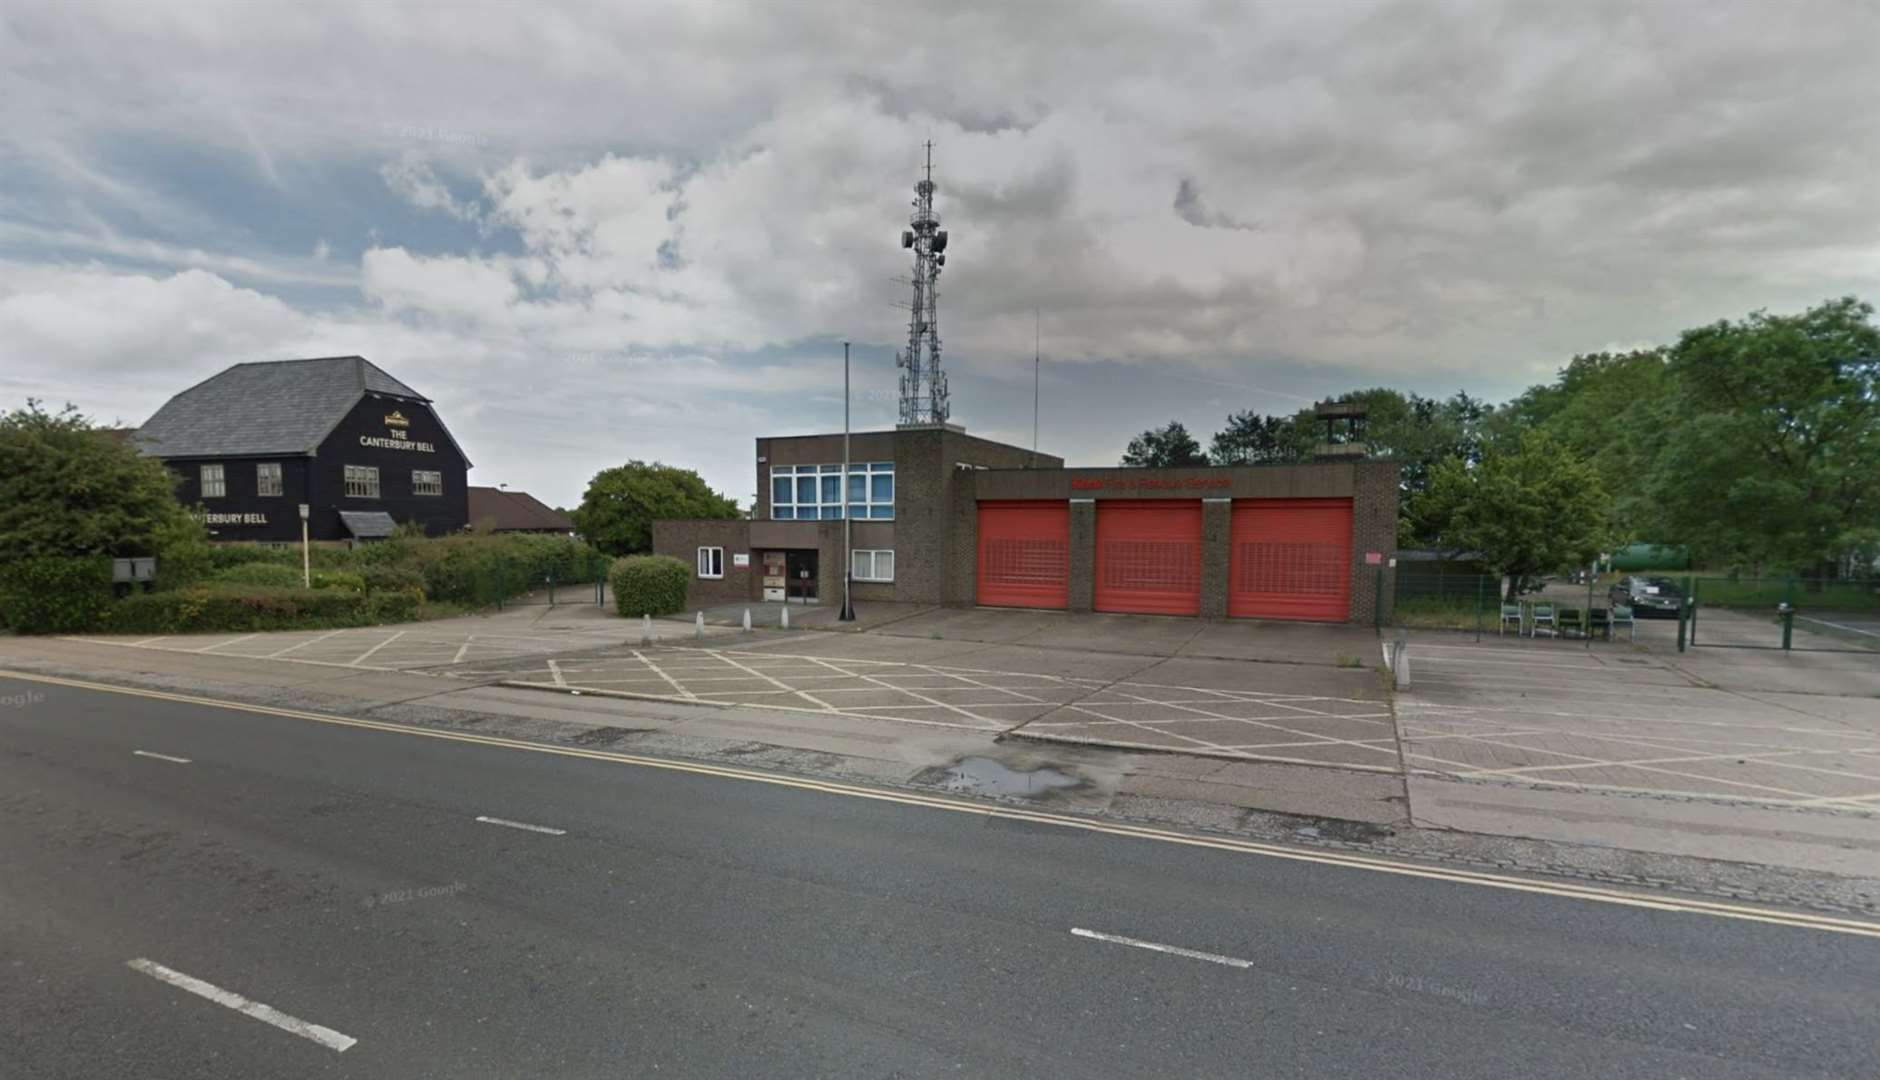 How the old fire station in Broadstairs looked in 2019. Picture: Google